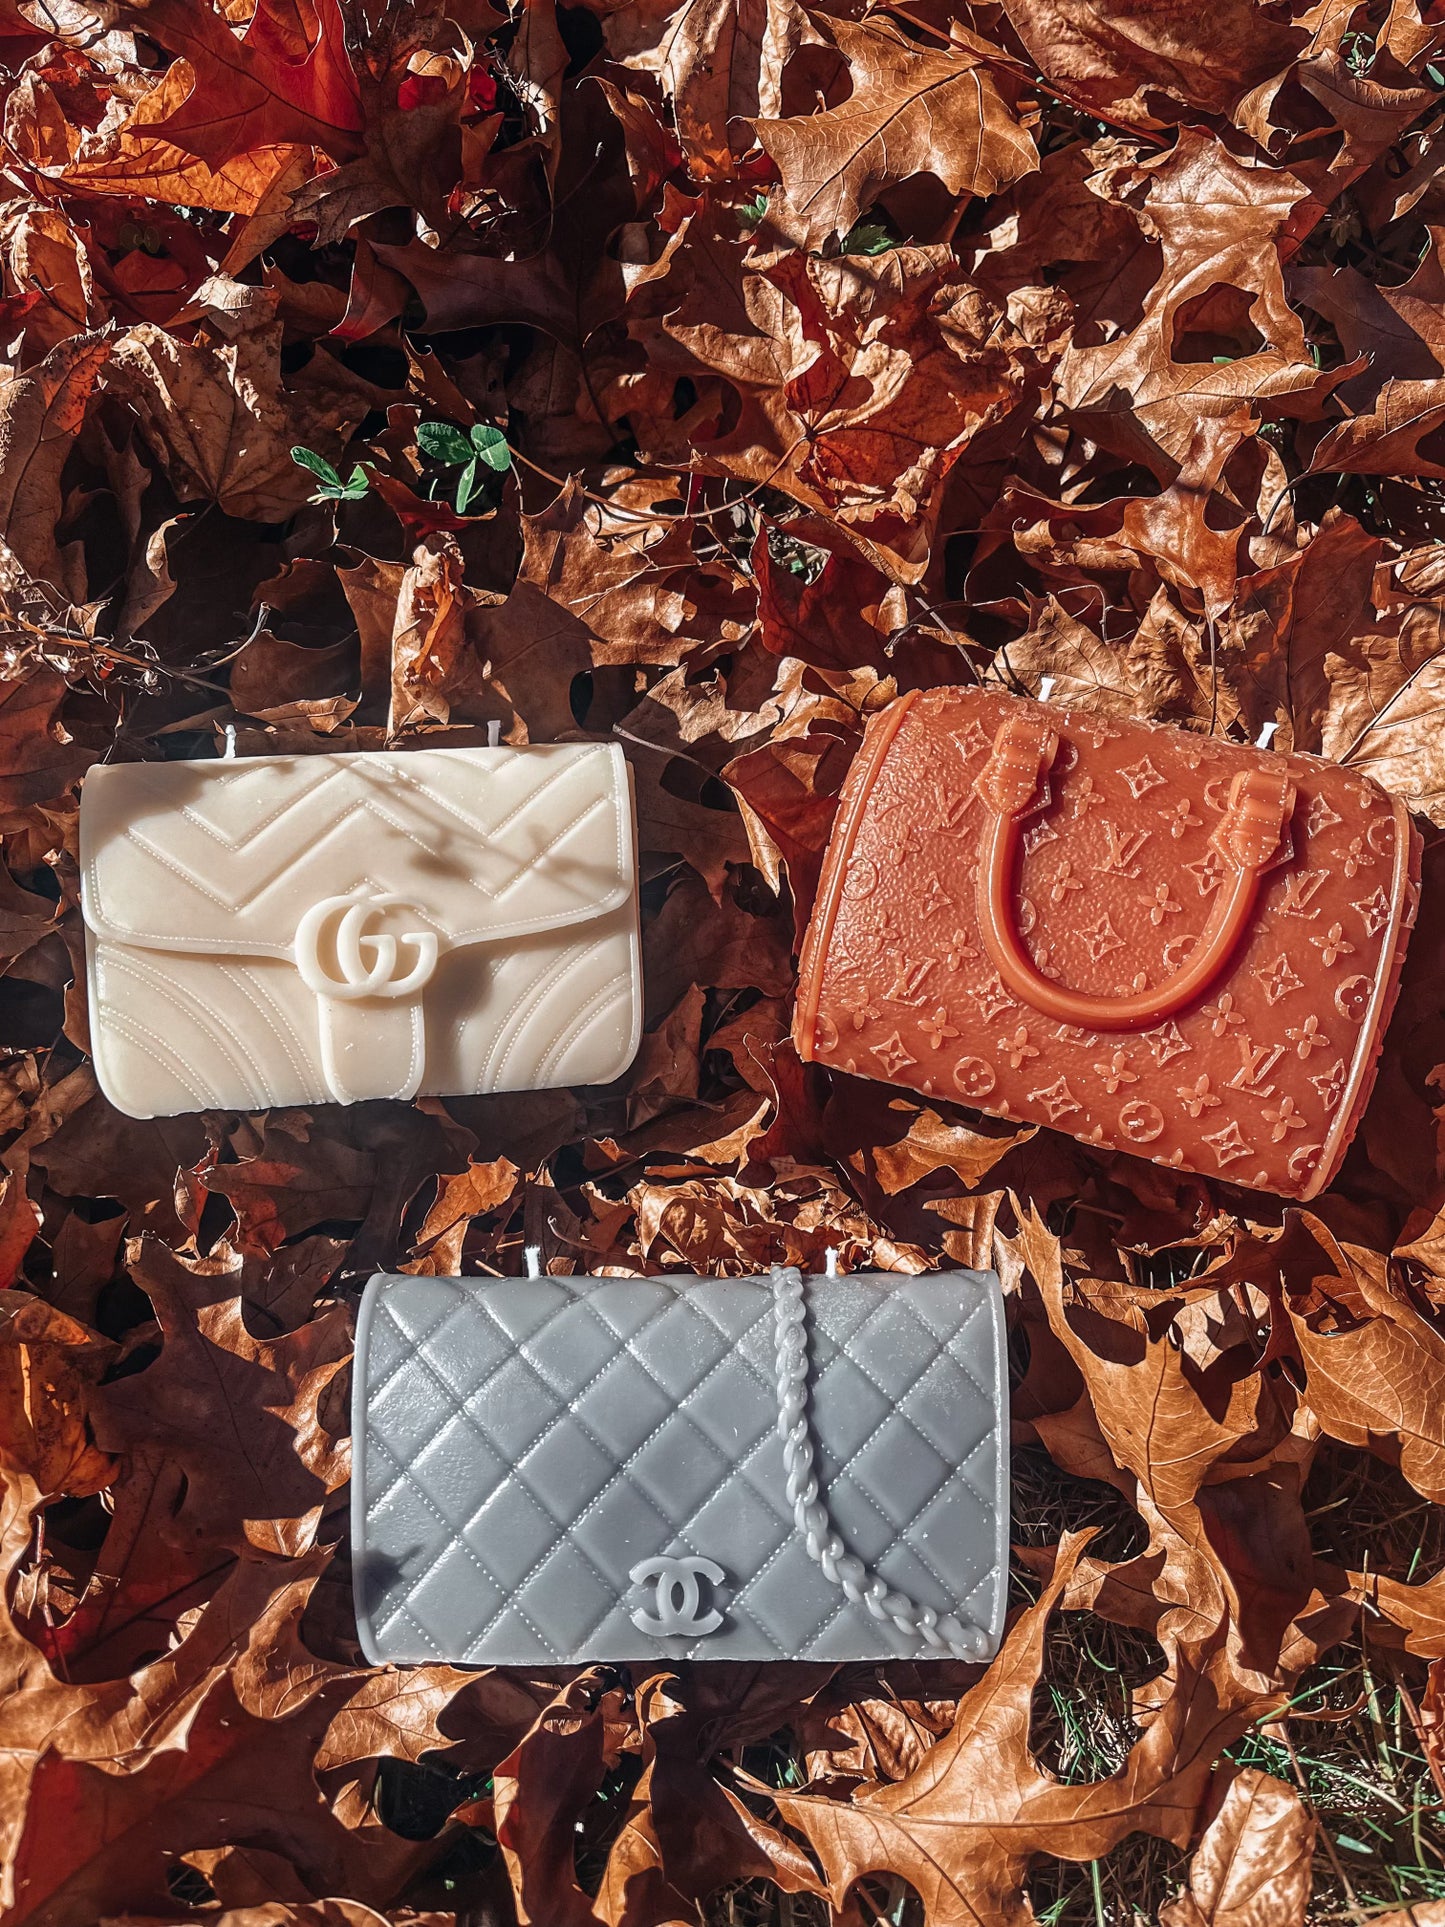 CHANEL Countries Bags & Handbags for Women